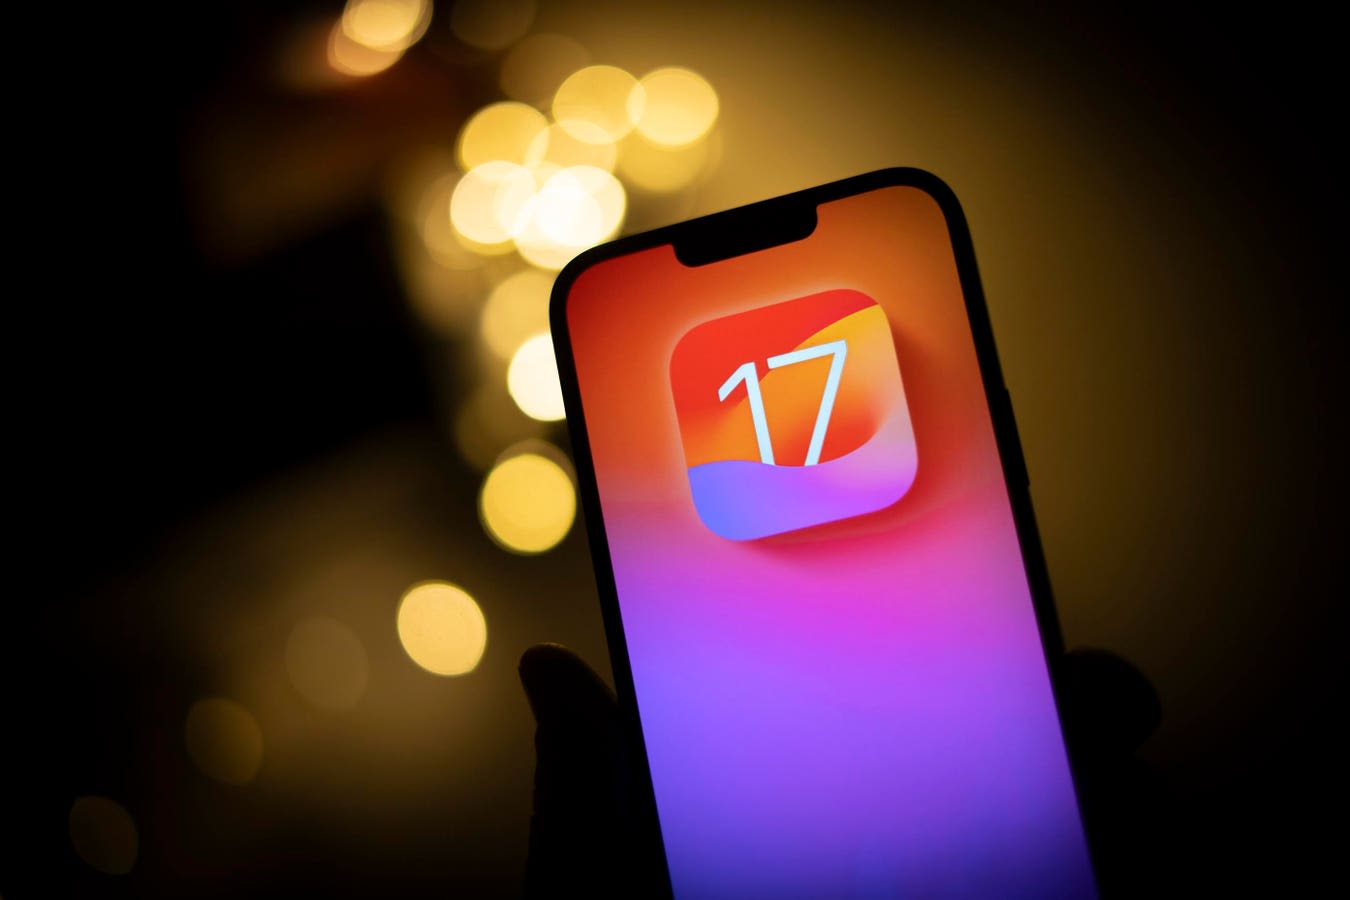 iOS 17.5.1: Apple Fixes Frustrating iPhone Photos Glitch